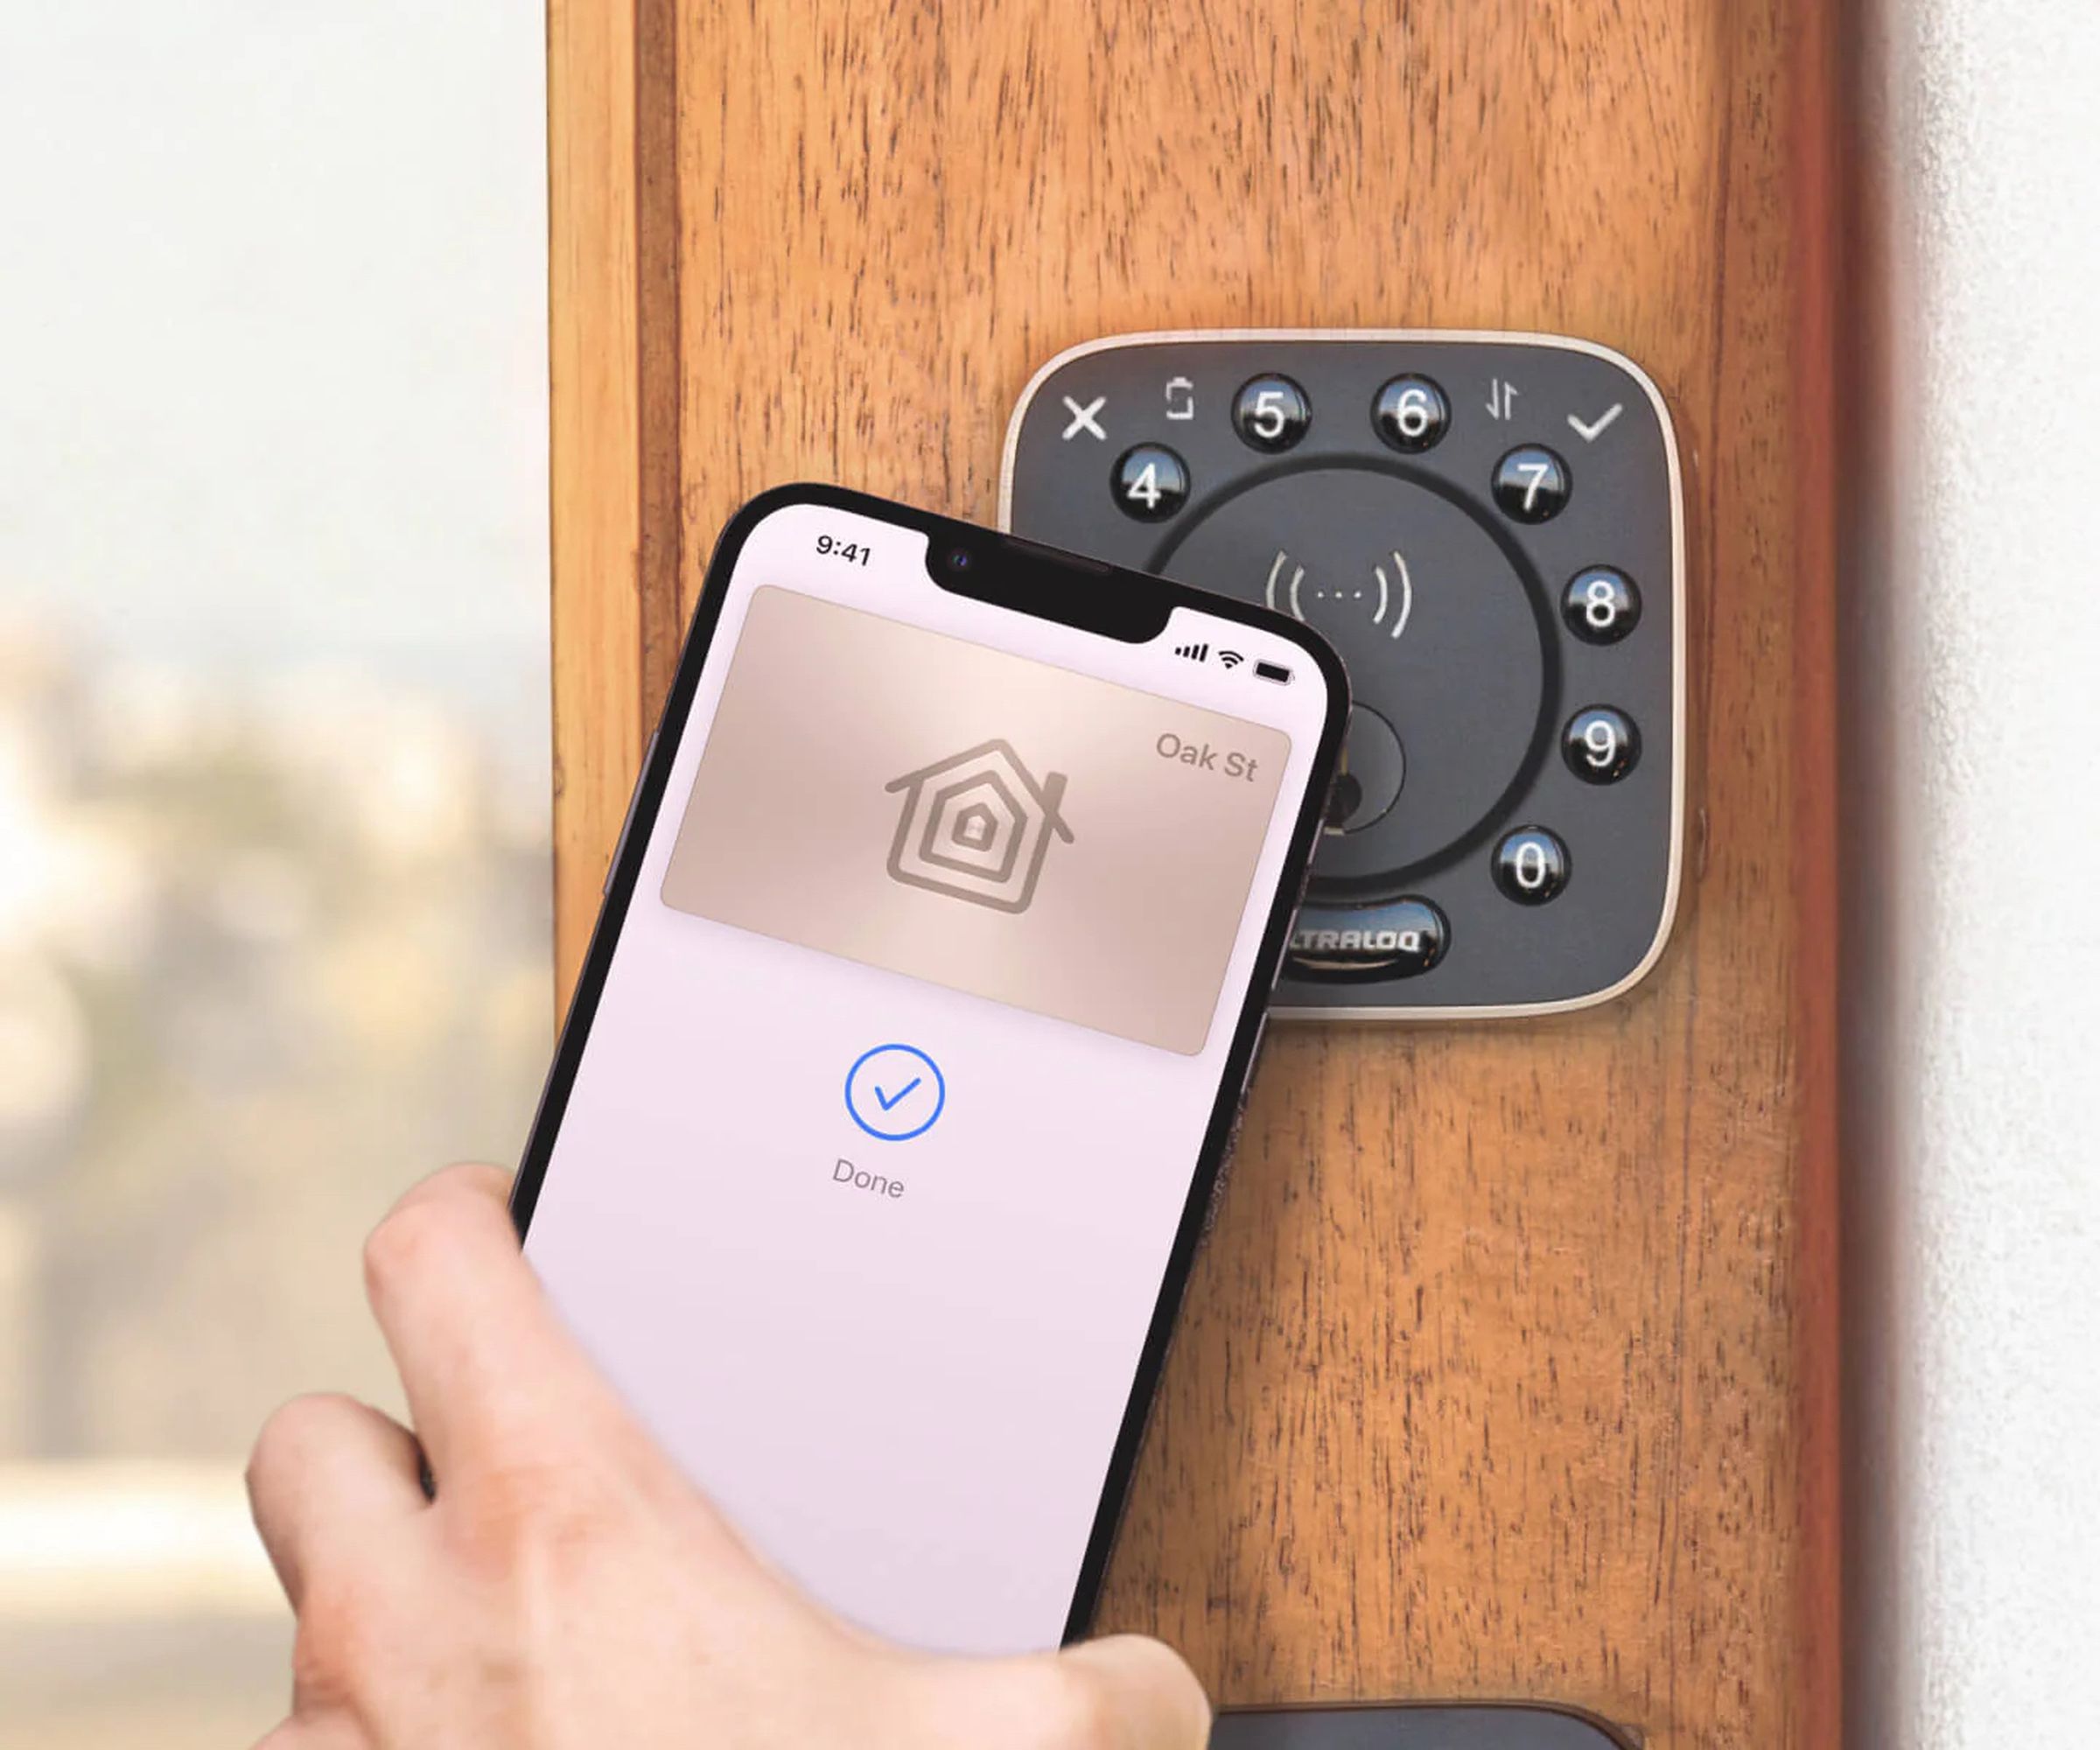 The NFC version of the Ultraloq Bolt will not feature a fingerprint reader but will work with Apple Home Key, so you can use your phone or watch to unlock the door.